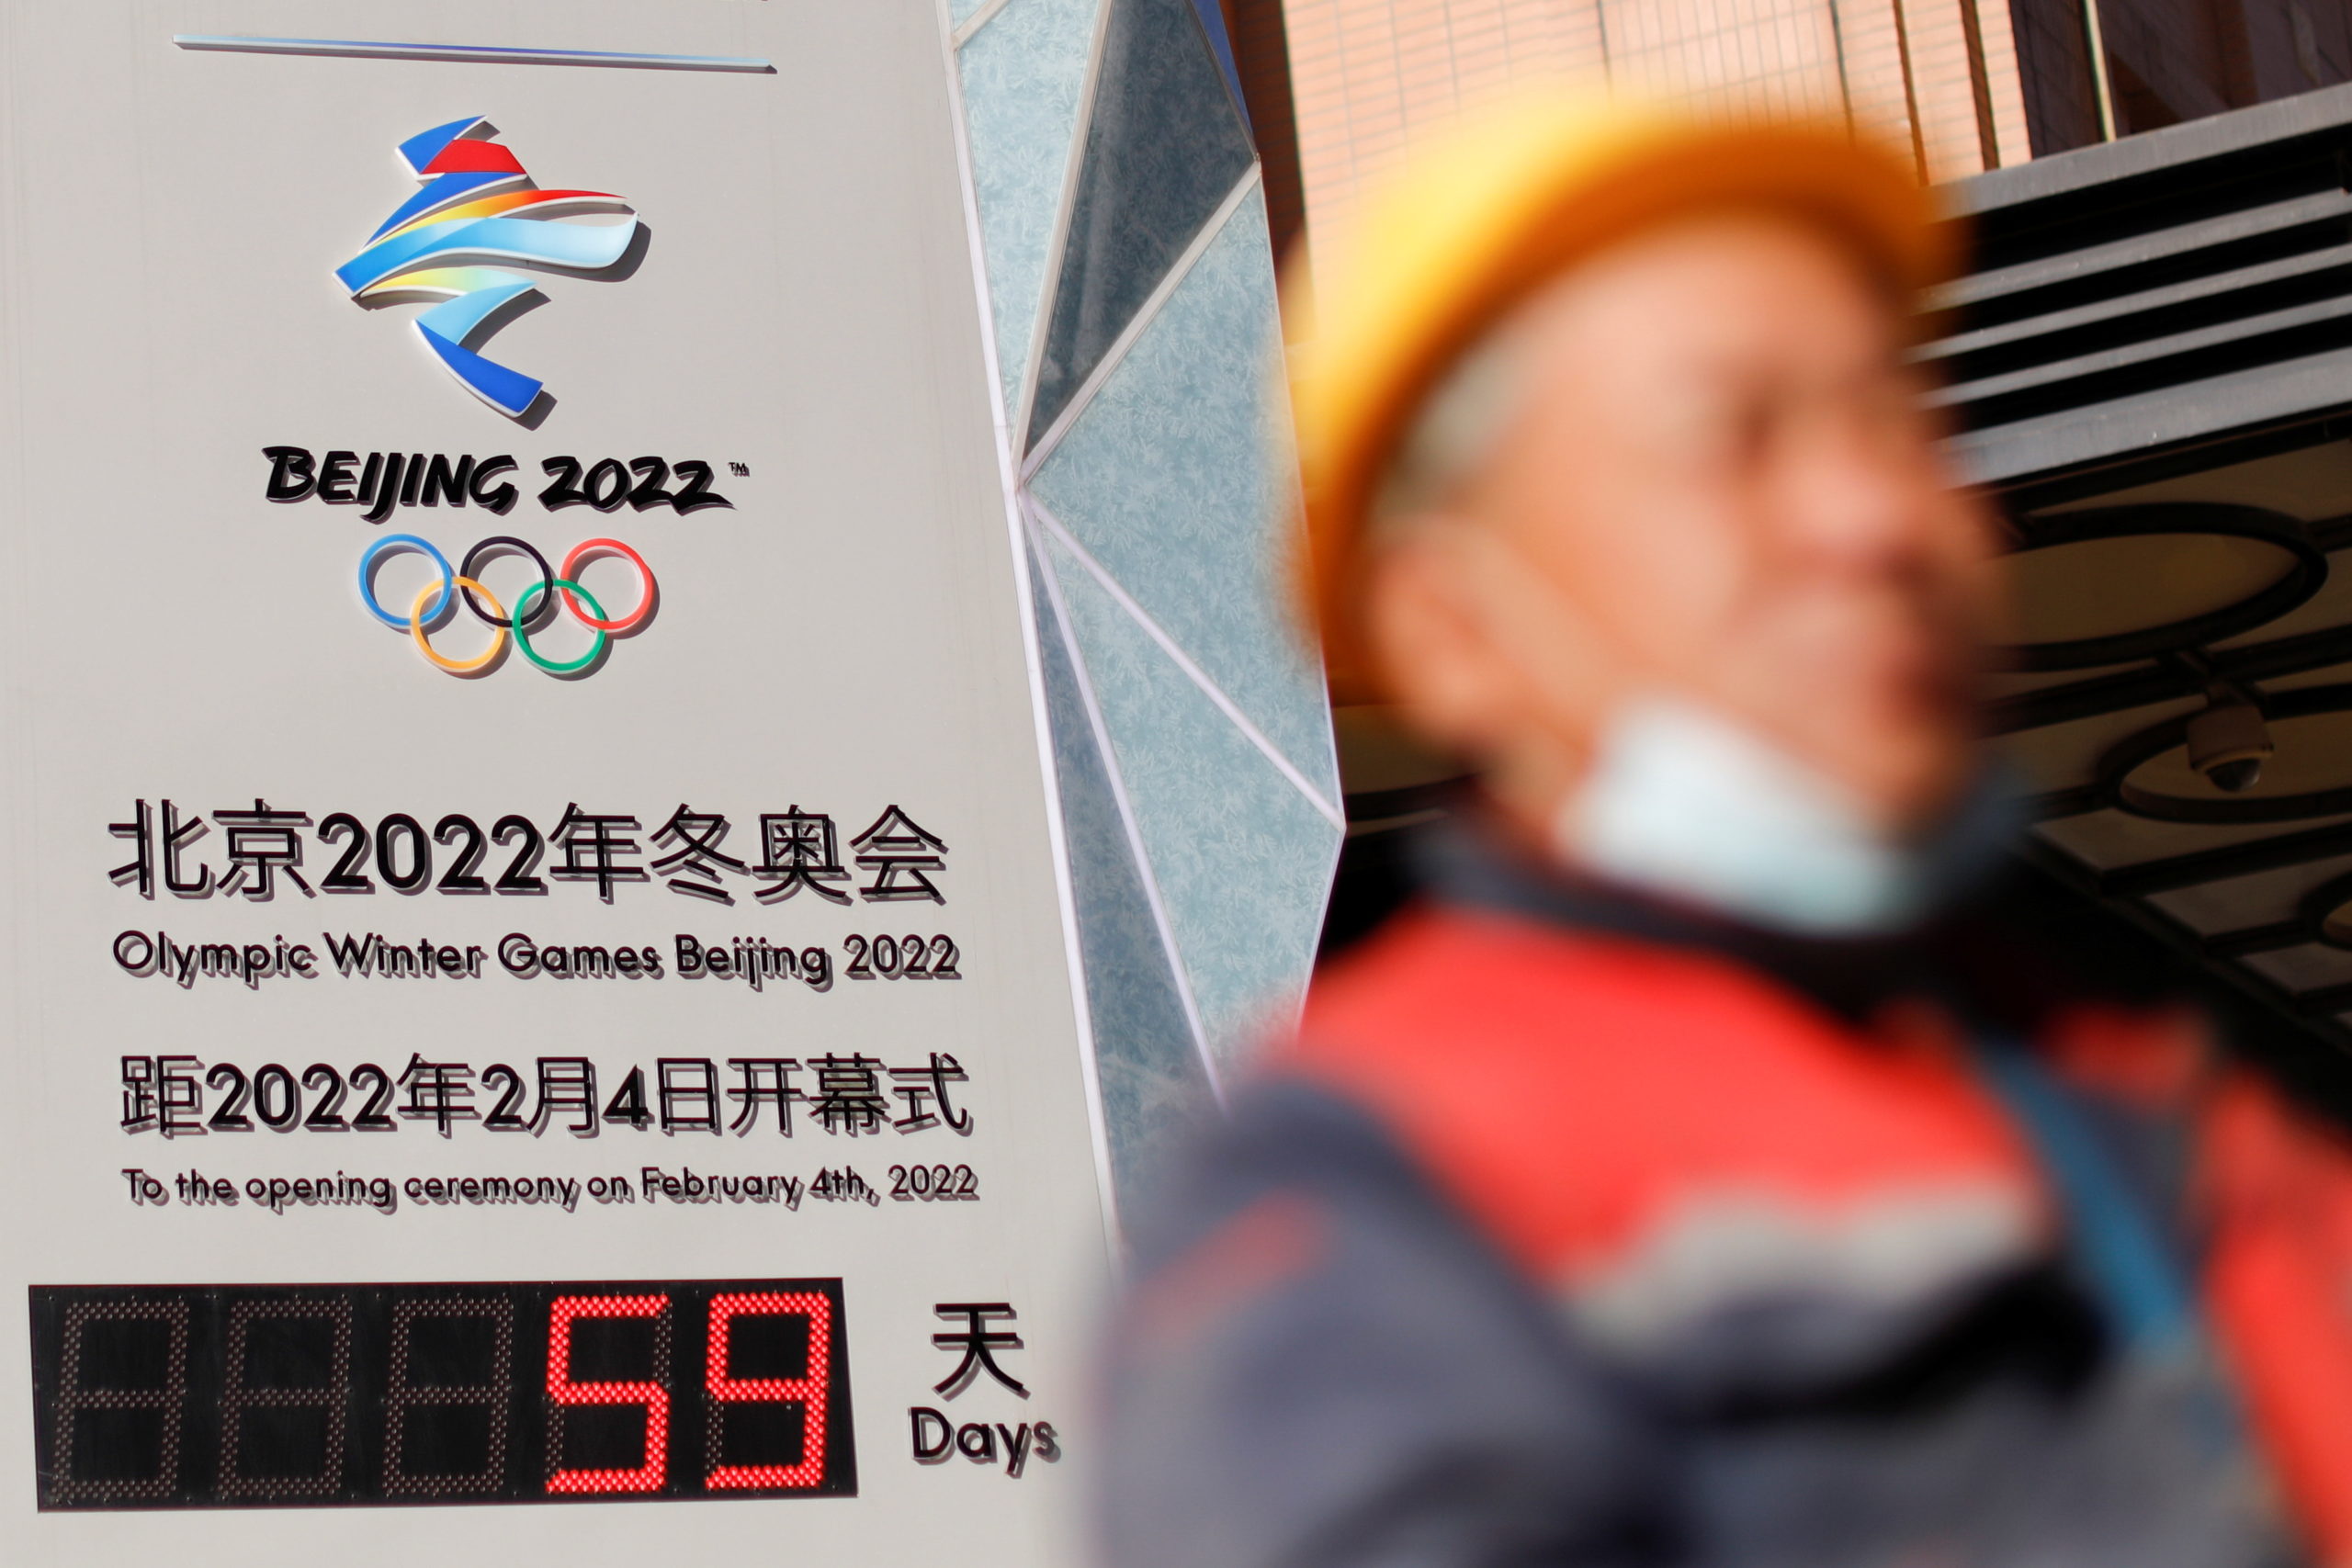 A worker walks past a countdown clock for the Beijing 2022 Winter Olympic Games in Beijing, China December 7, 2021.